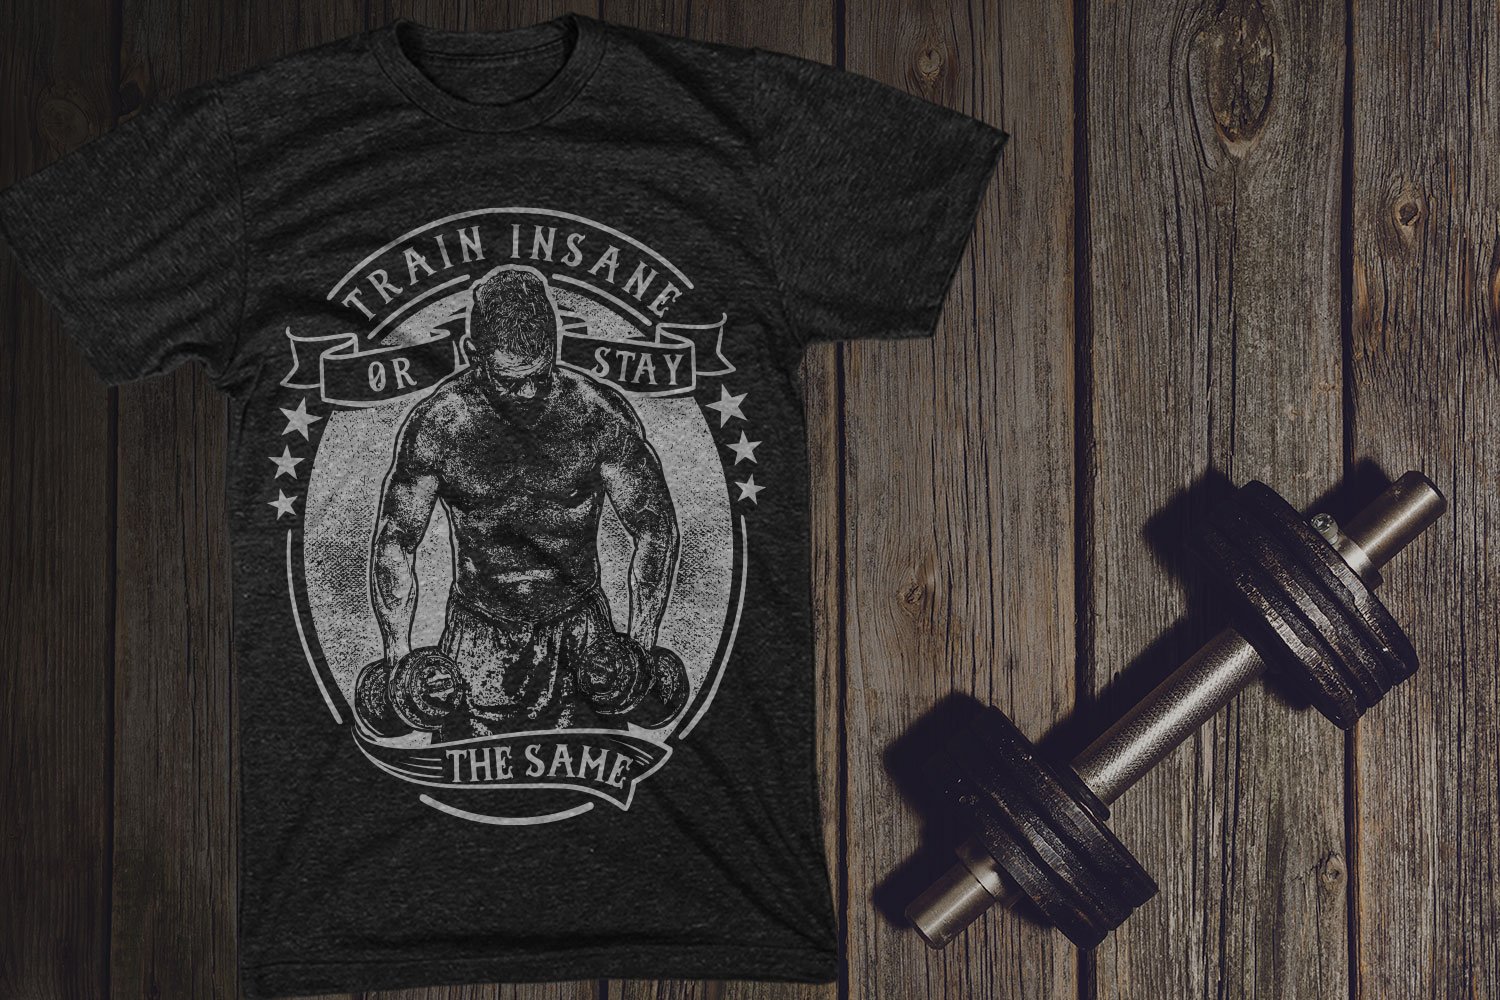 Black t-shirt with a gym illustration.